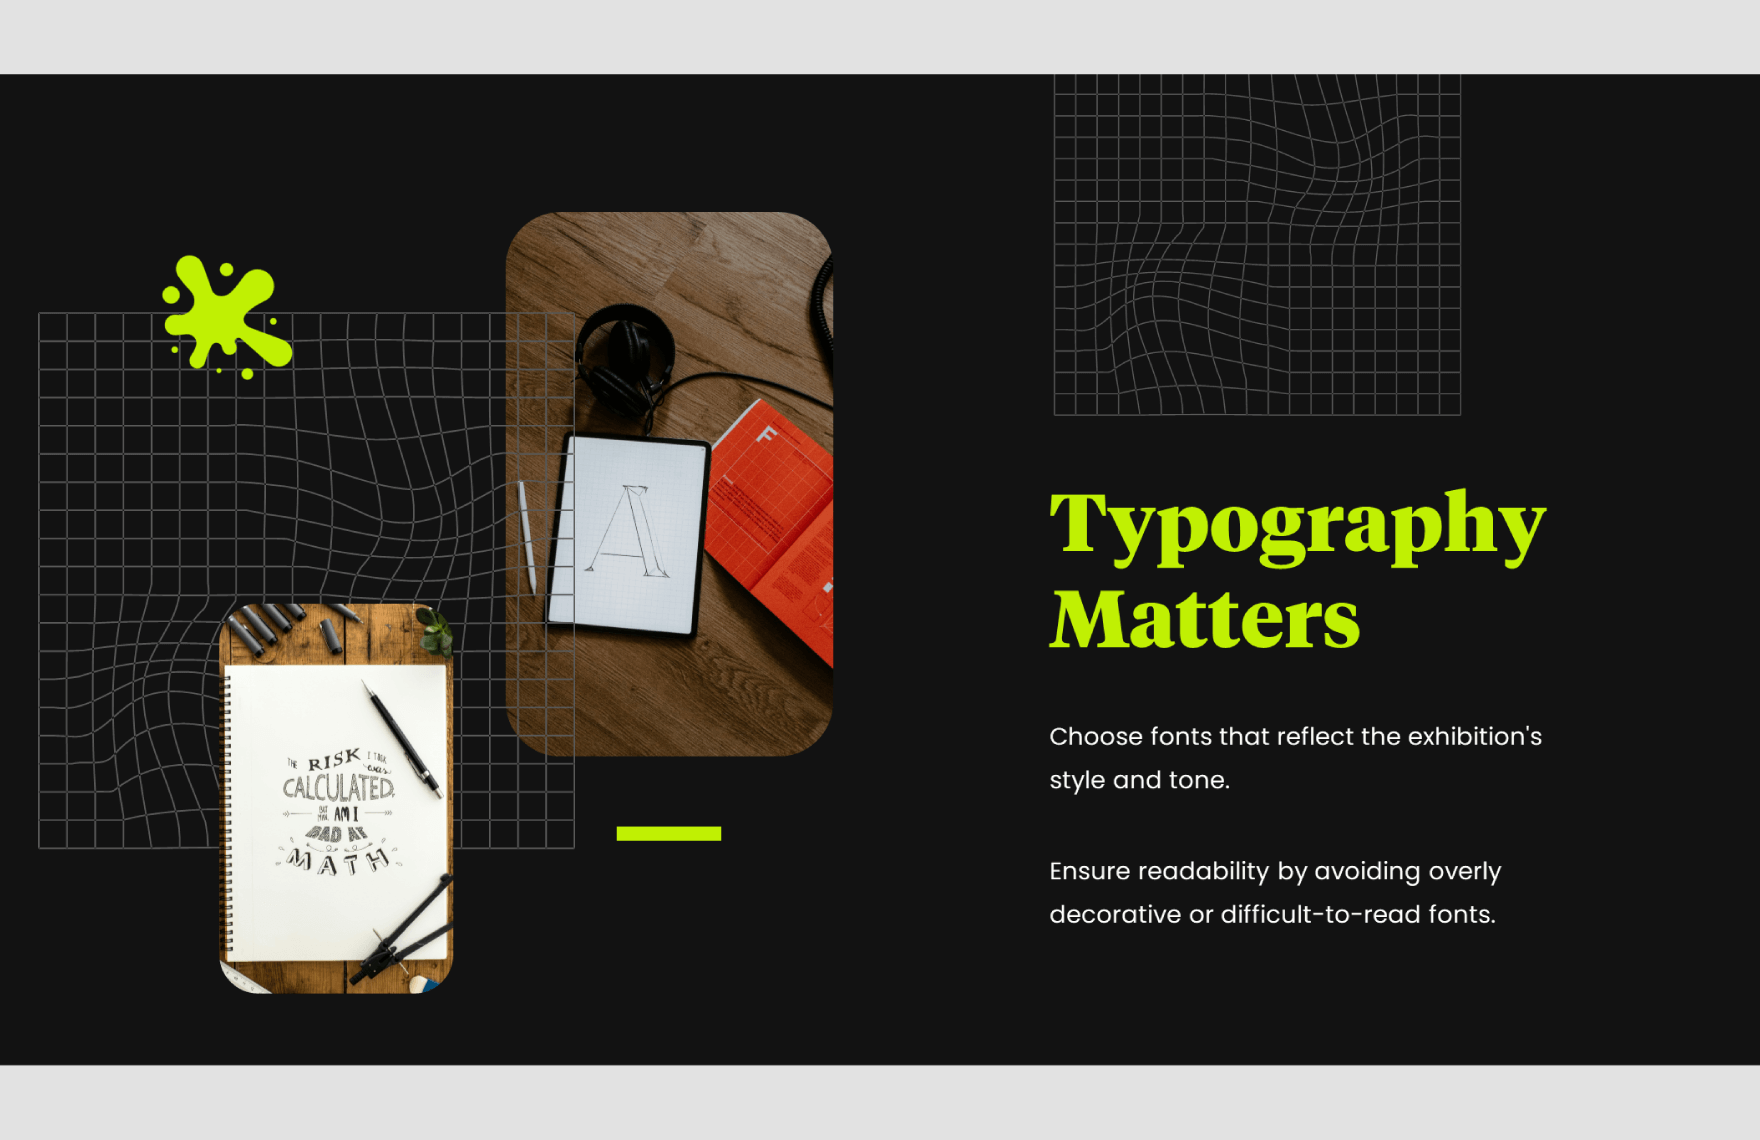 Gallery Poster Template